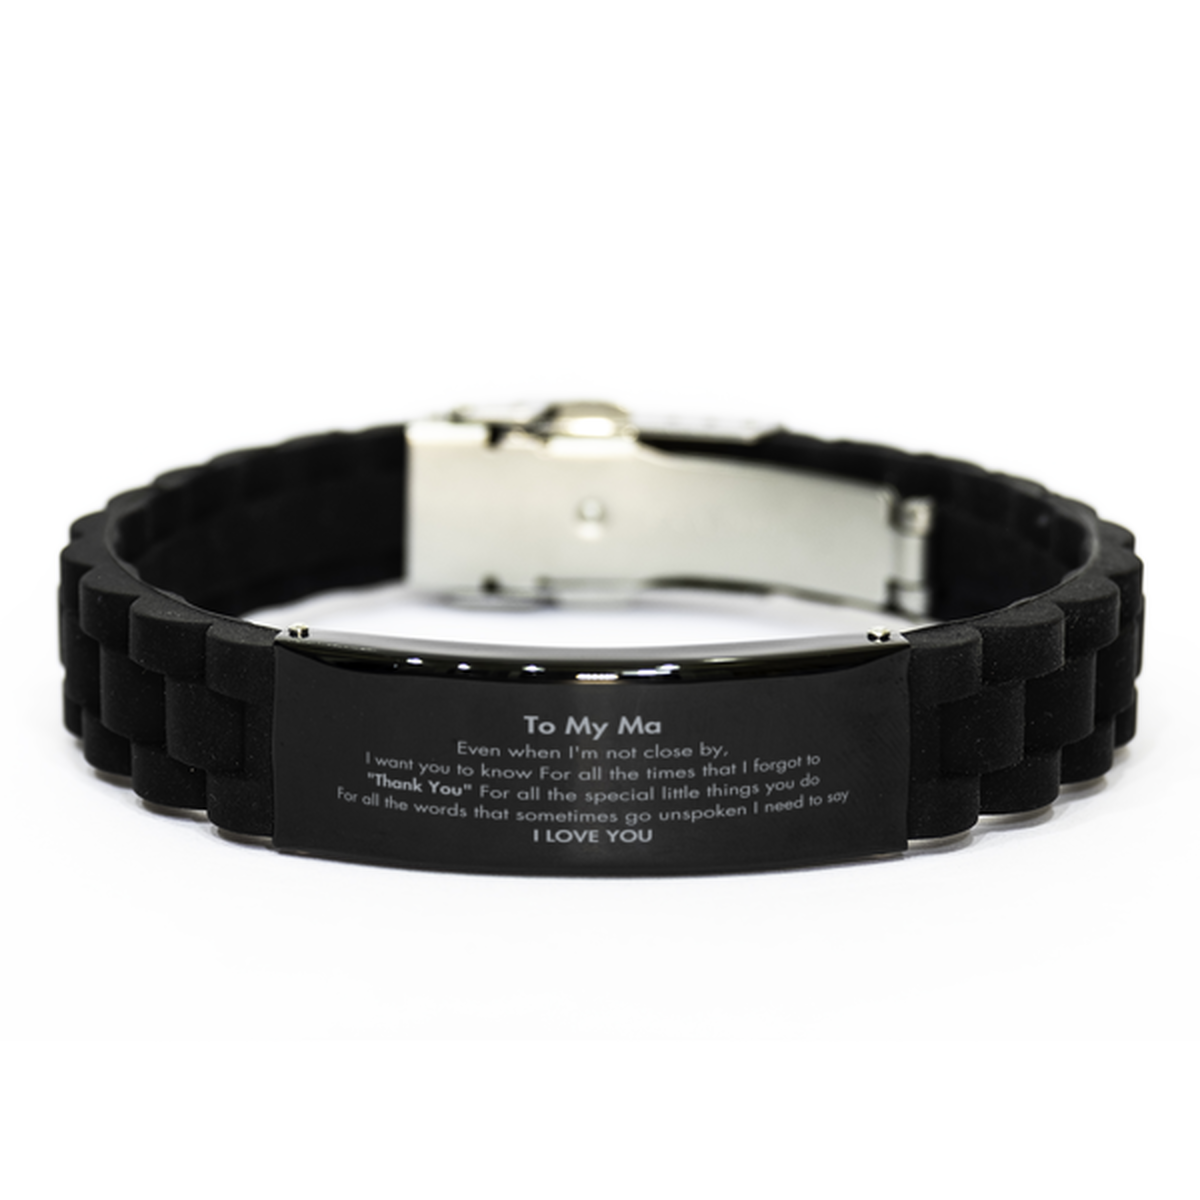 Thank You Gifts for Ma, Keepsake Black Glidelock Clasp Bracelet Gifts for Ma Birthday Mother's day Father's Day Ma For all the words That sometimes go unspoken I need to say I LOVE YOU